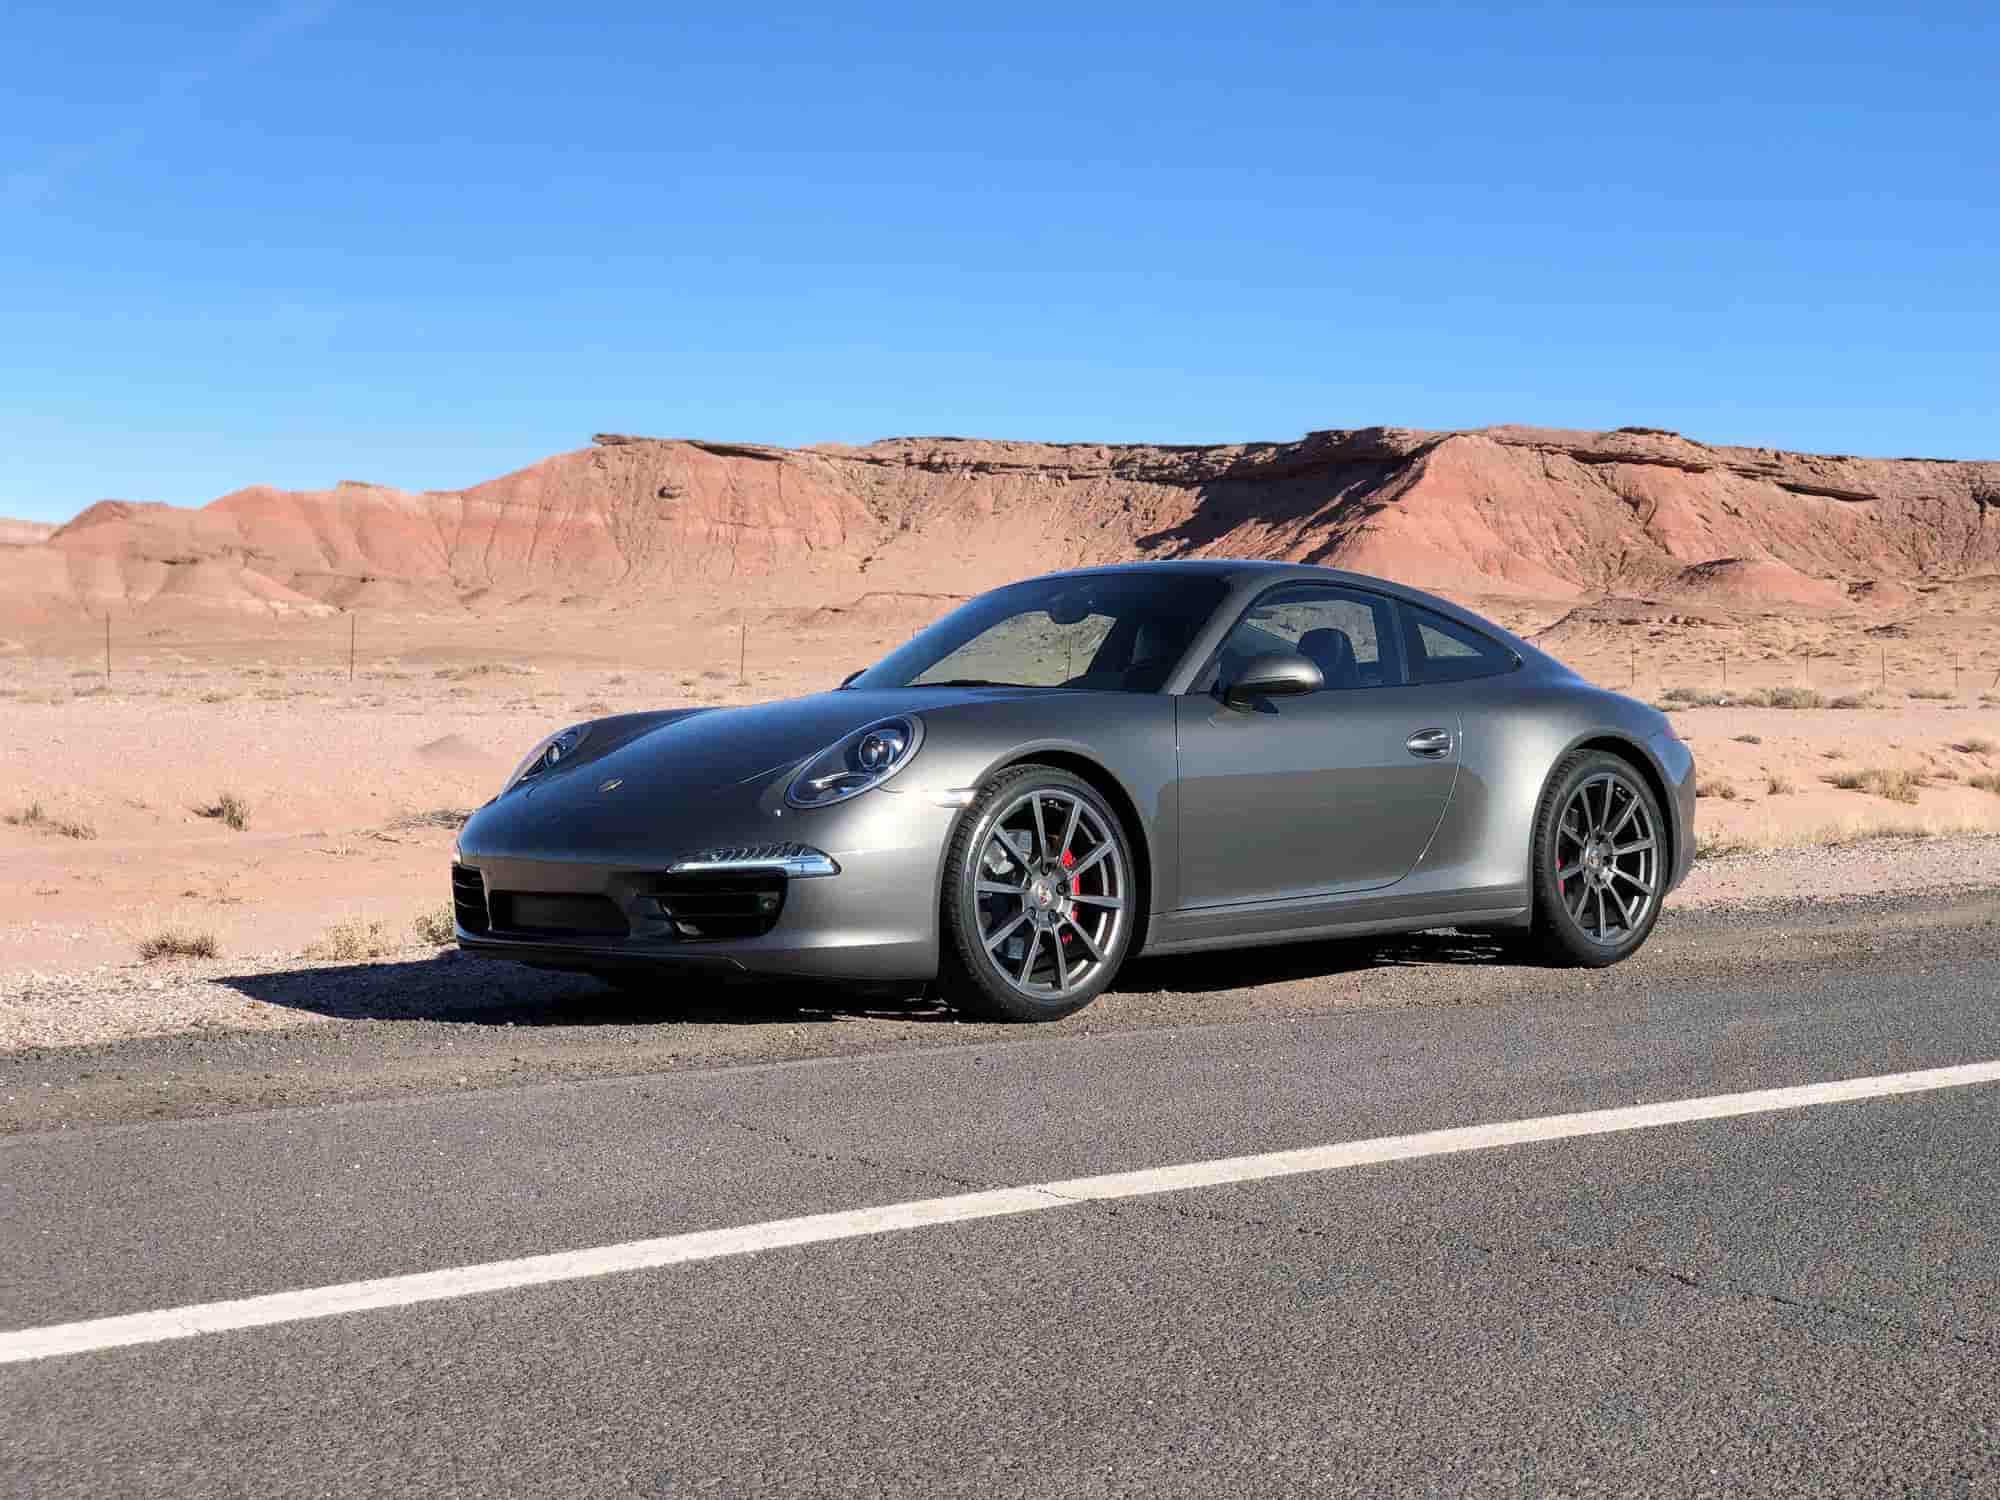 2013 Porsche 911 - 2013 Porsche 911 C4S - Rare Manual, Sport Exhaust, Glass Roof - loaded, mint - Used - VIN WP0AB2A91DS121427 - 47,863 Miles - 6 cyl - 4WD - Manual - Coupe - Gray - East Setauket, NY 11790, United States